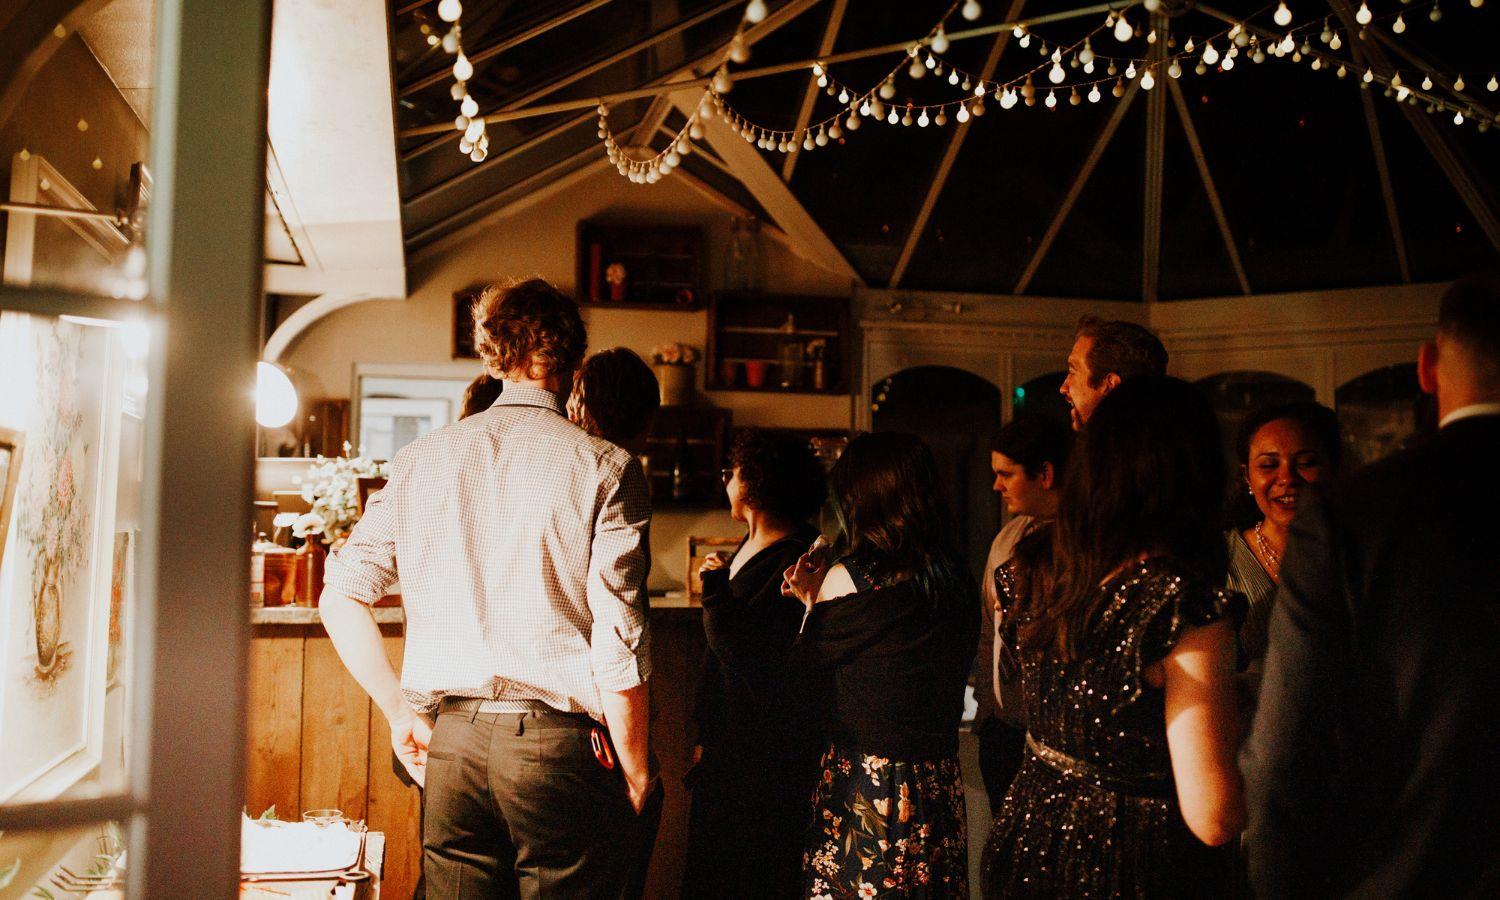 People enjoying a private party in a converted barn